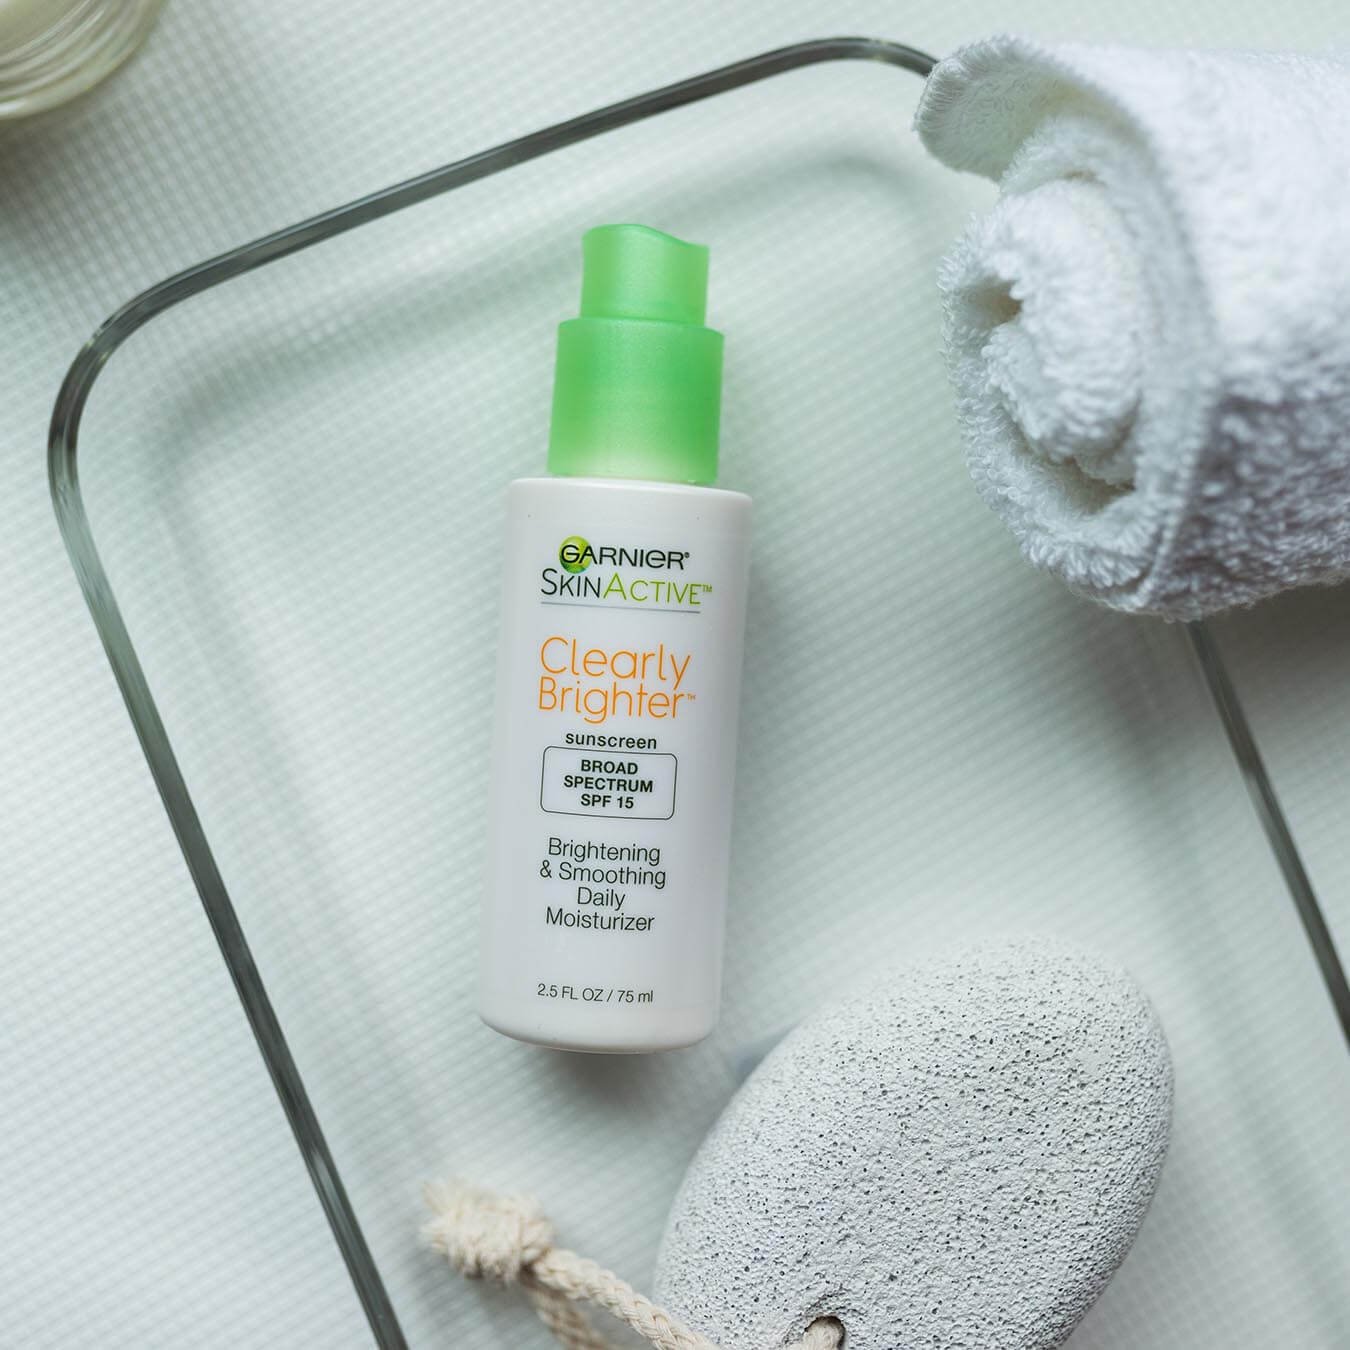 Garnier SkinActive Clearly Brighter Sunscreen Broad Spectrum SPF 15 Brightening & Smoothing Daily Moisturizer sitting in a rectangular glass dish with a pumice stone on a rope on a white mat with a rolled up white hand towel and bowl.